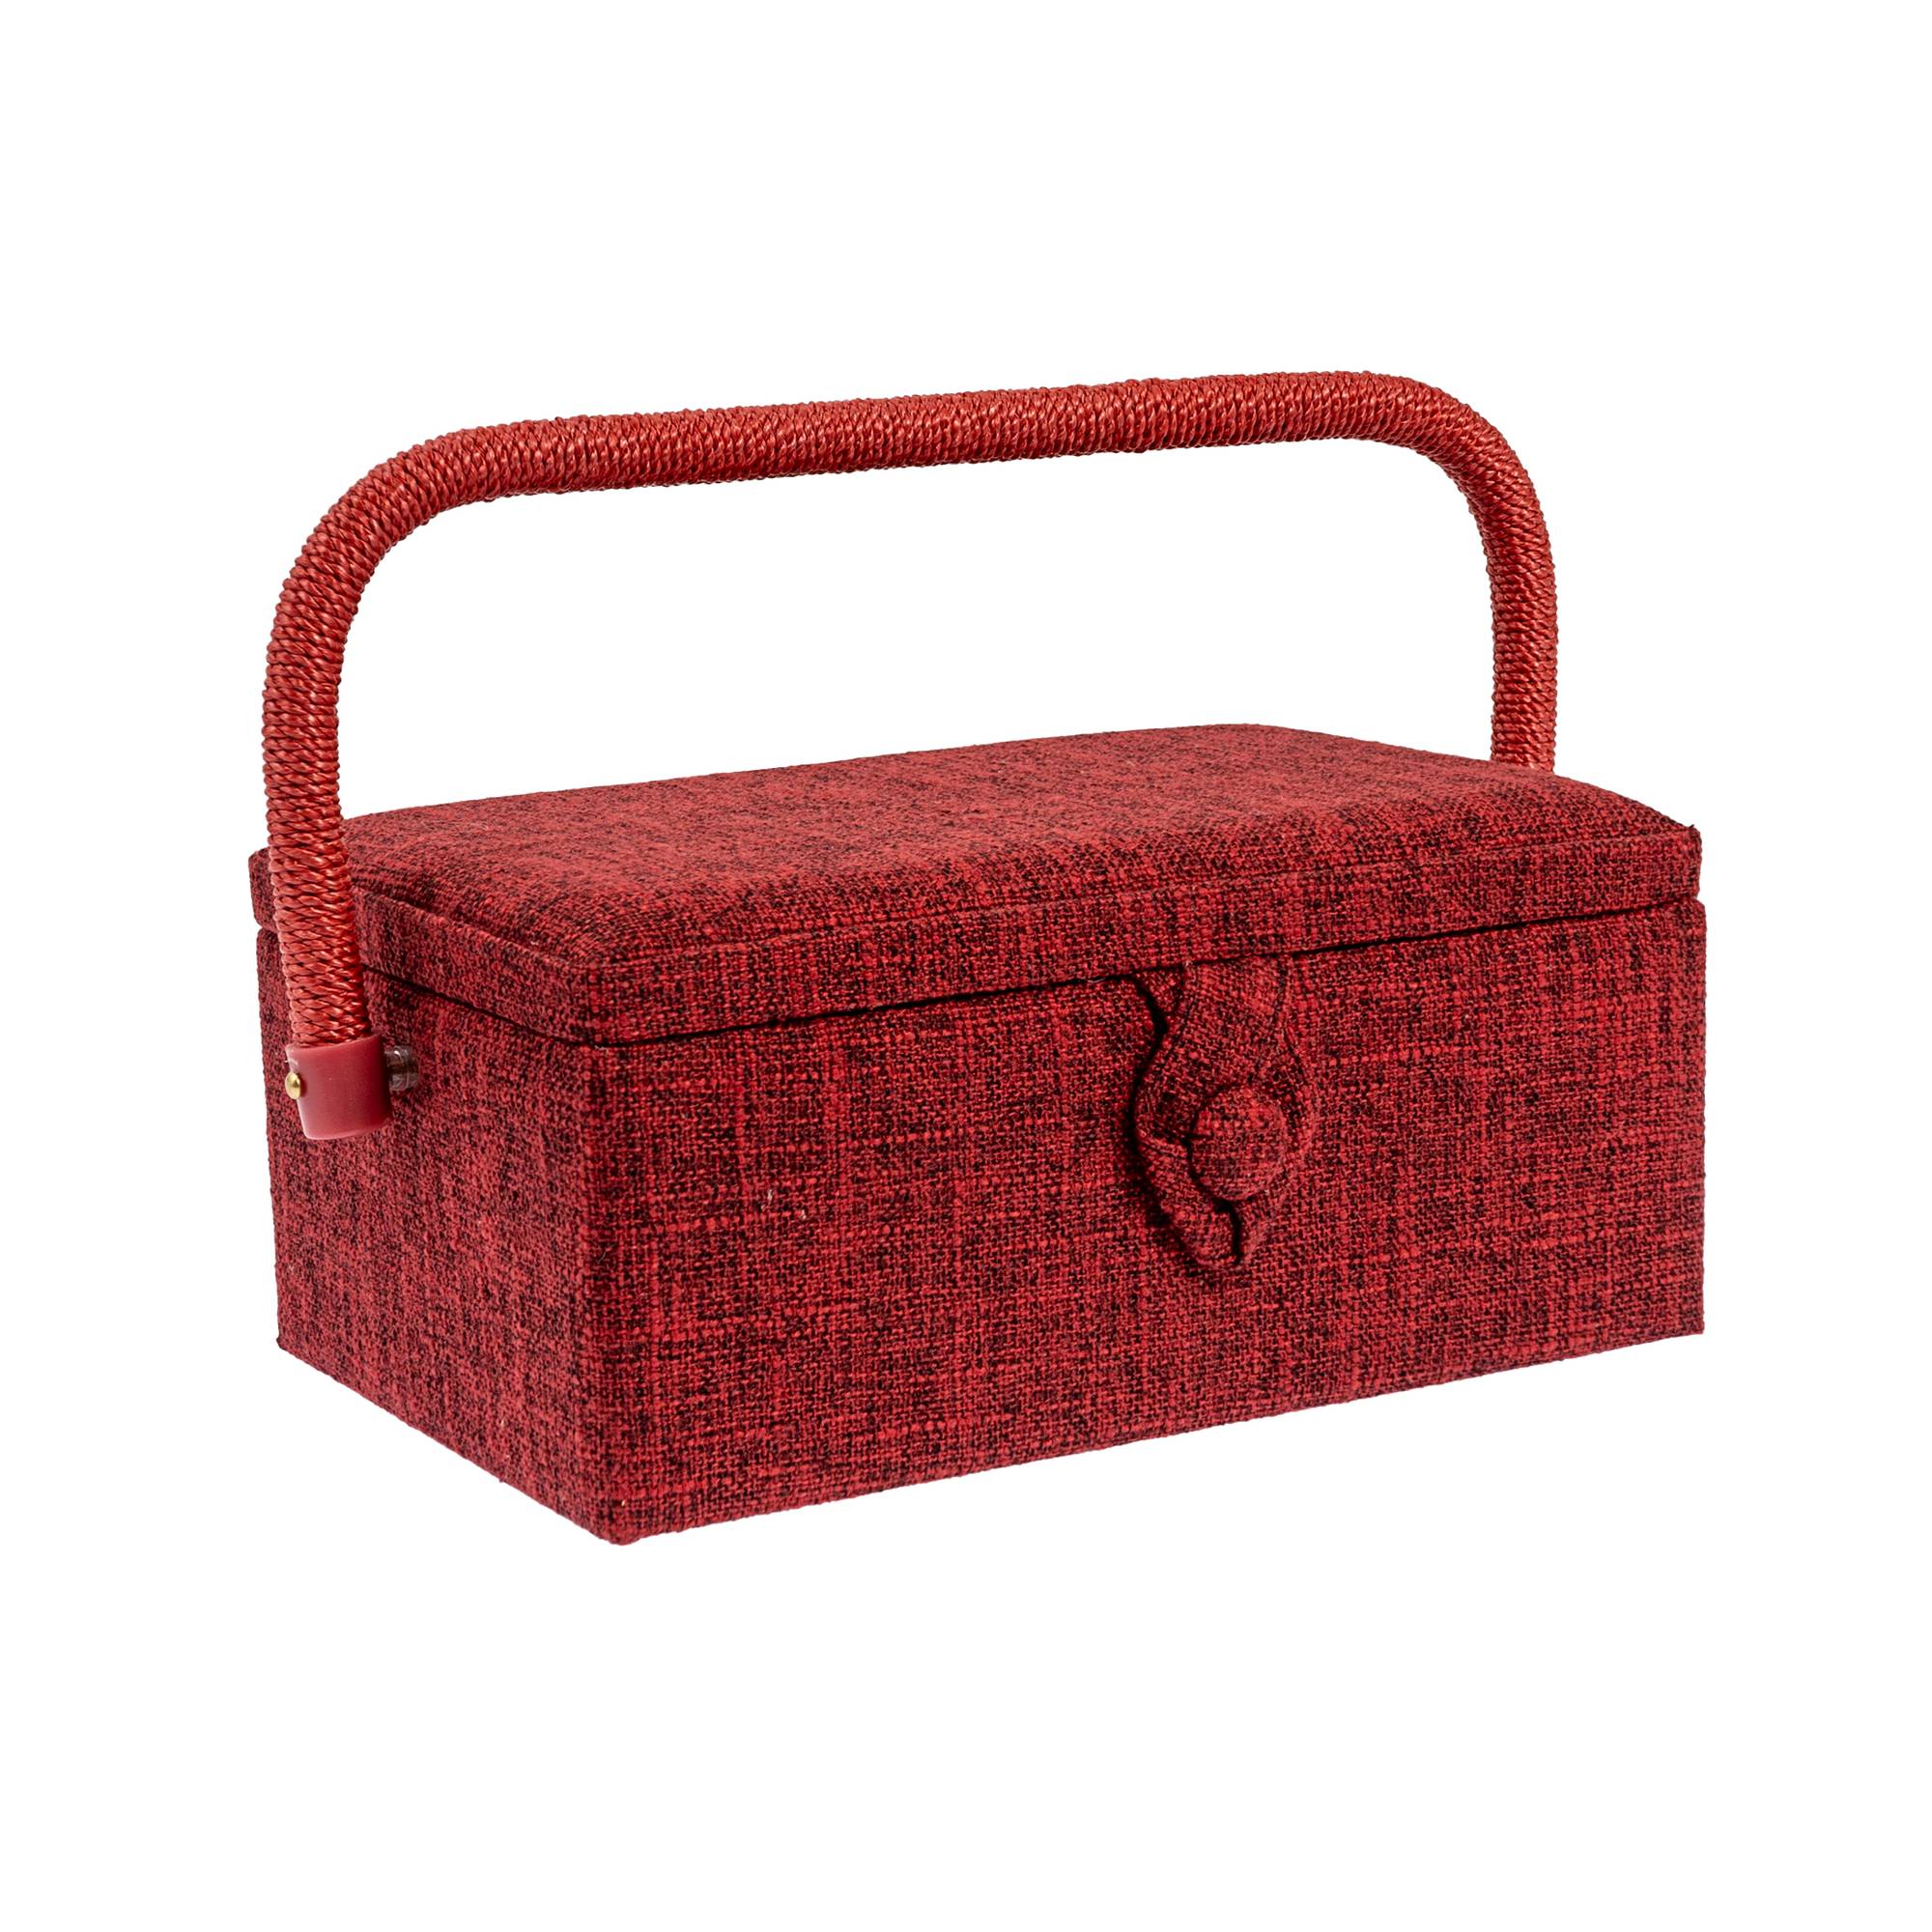 Red Sewing Box